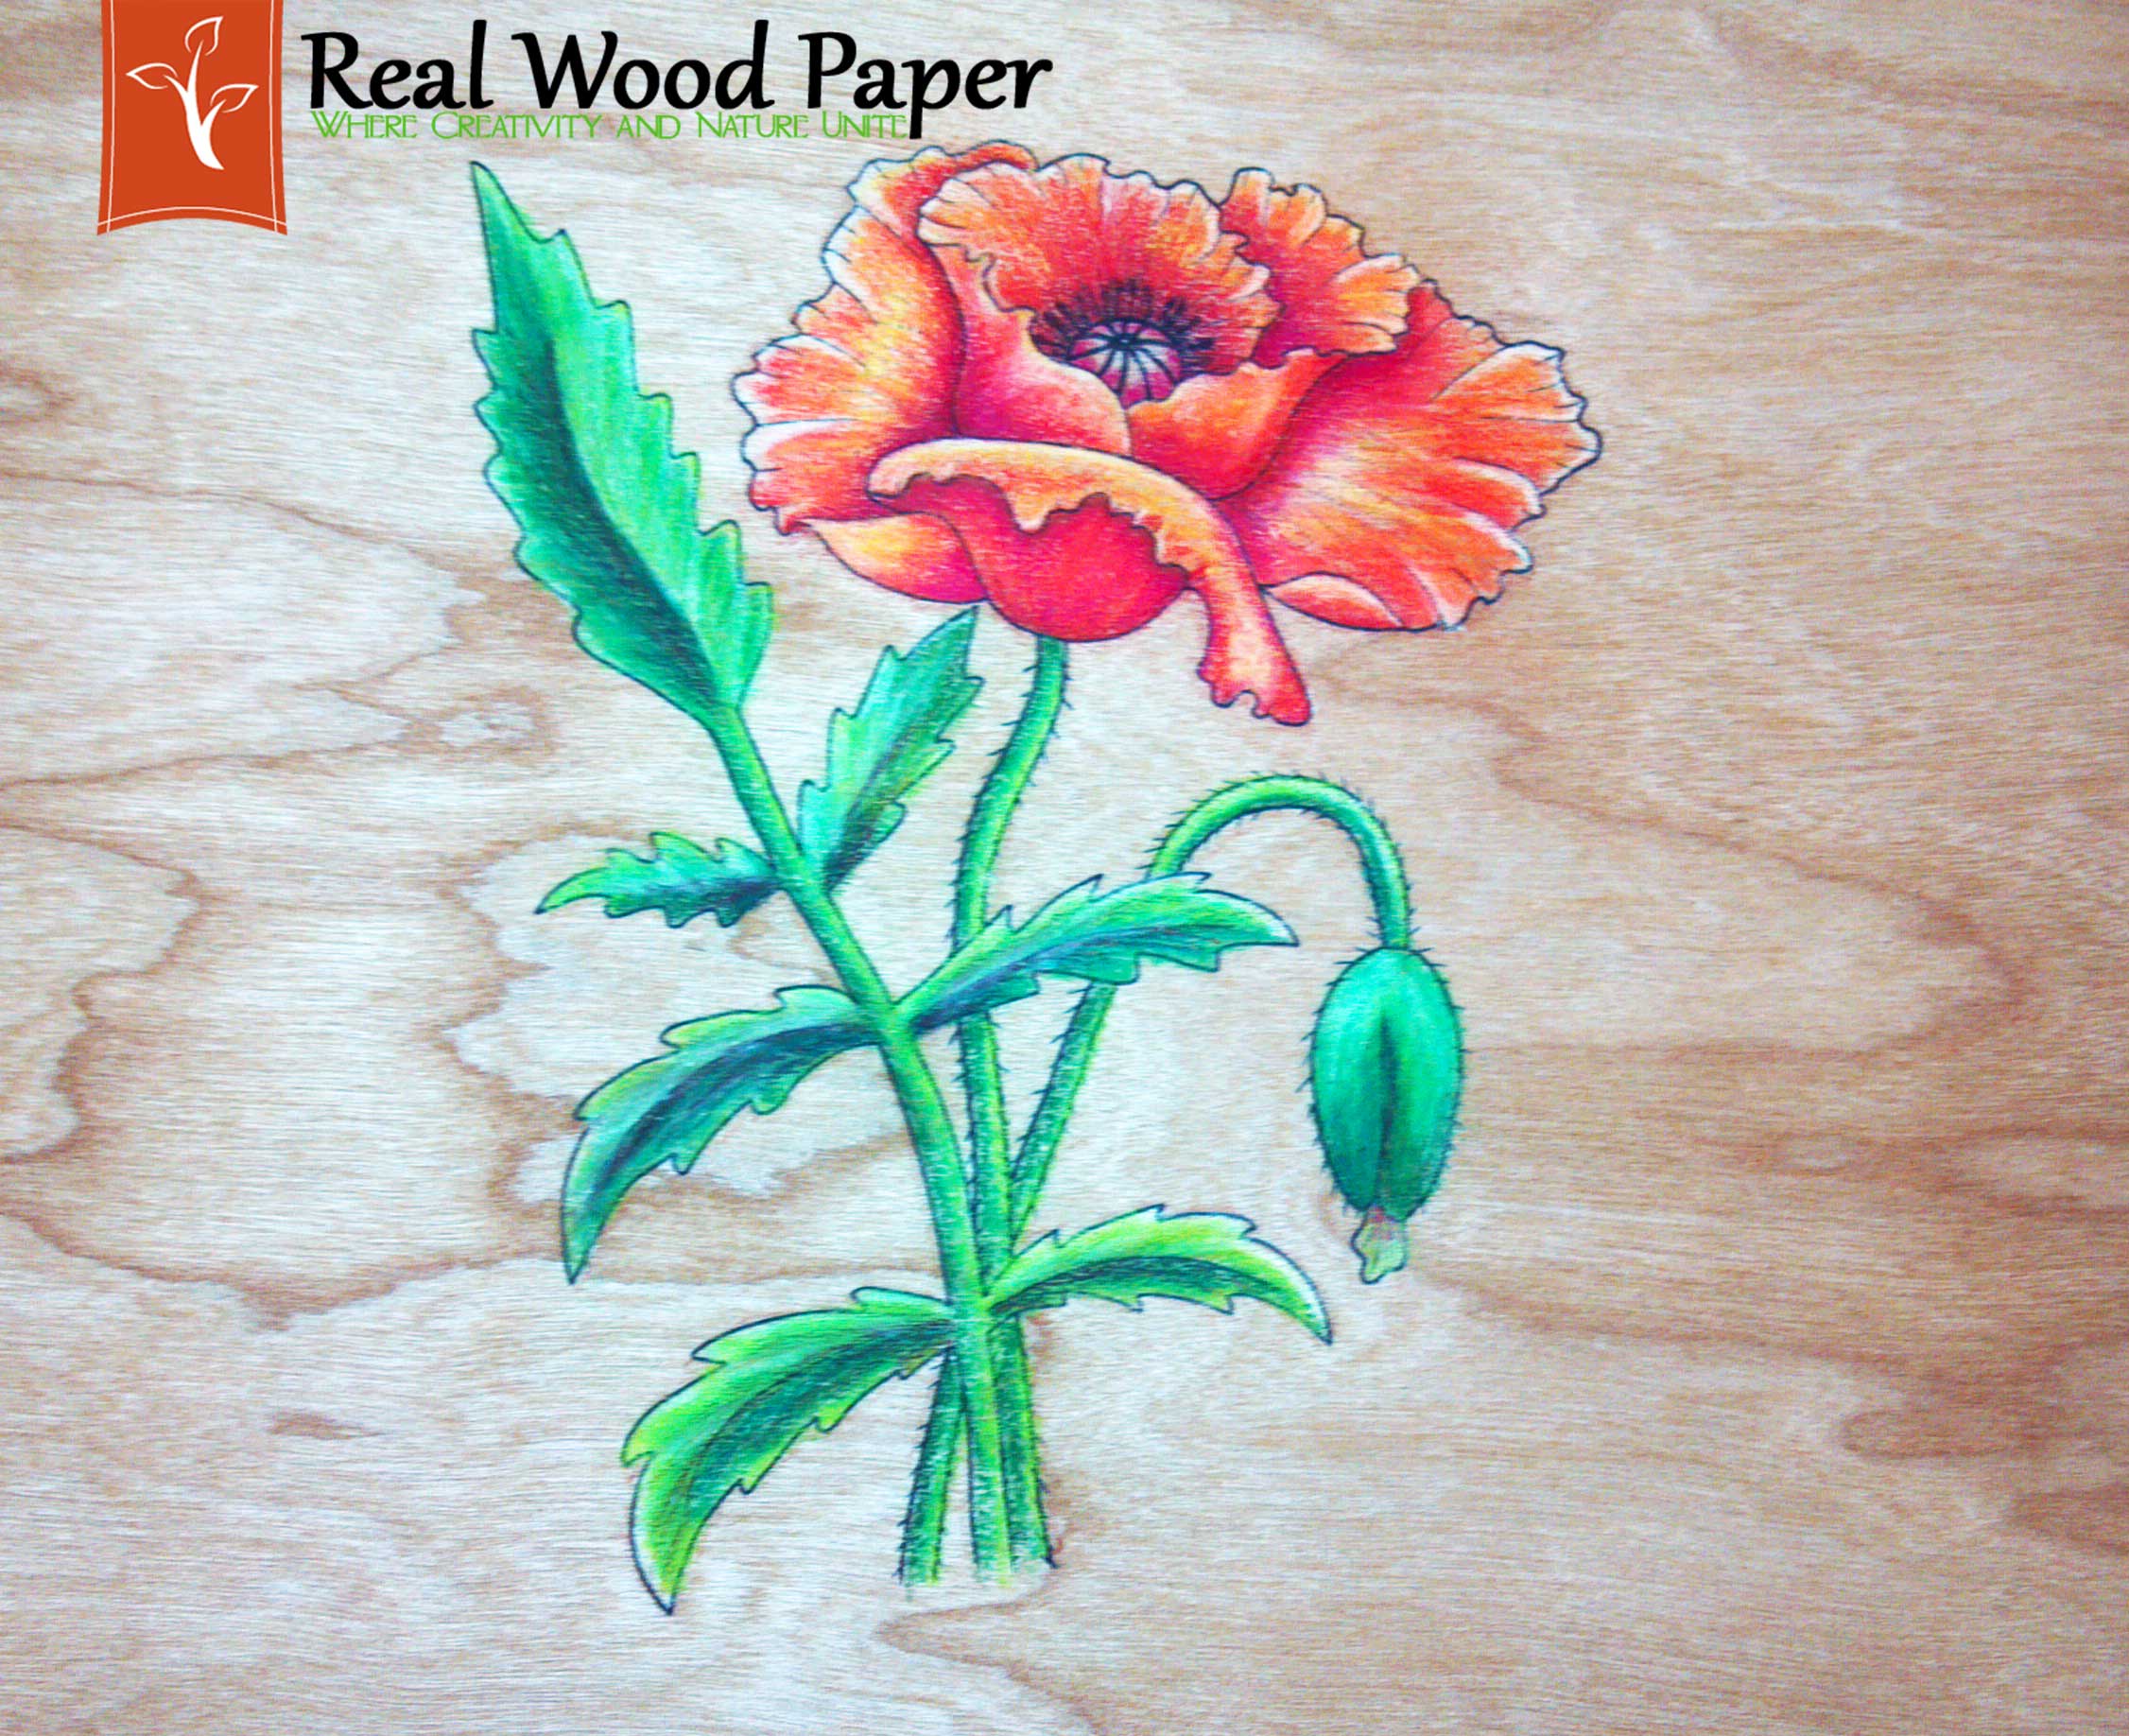 Real Wood Paper Colored Pencils on Cherry Wood